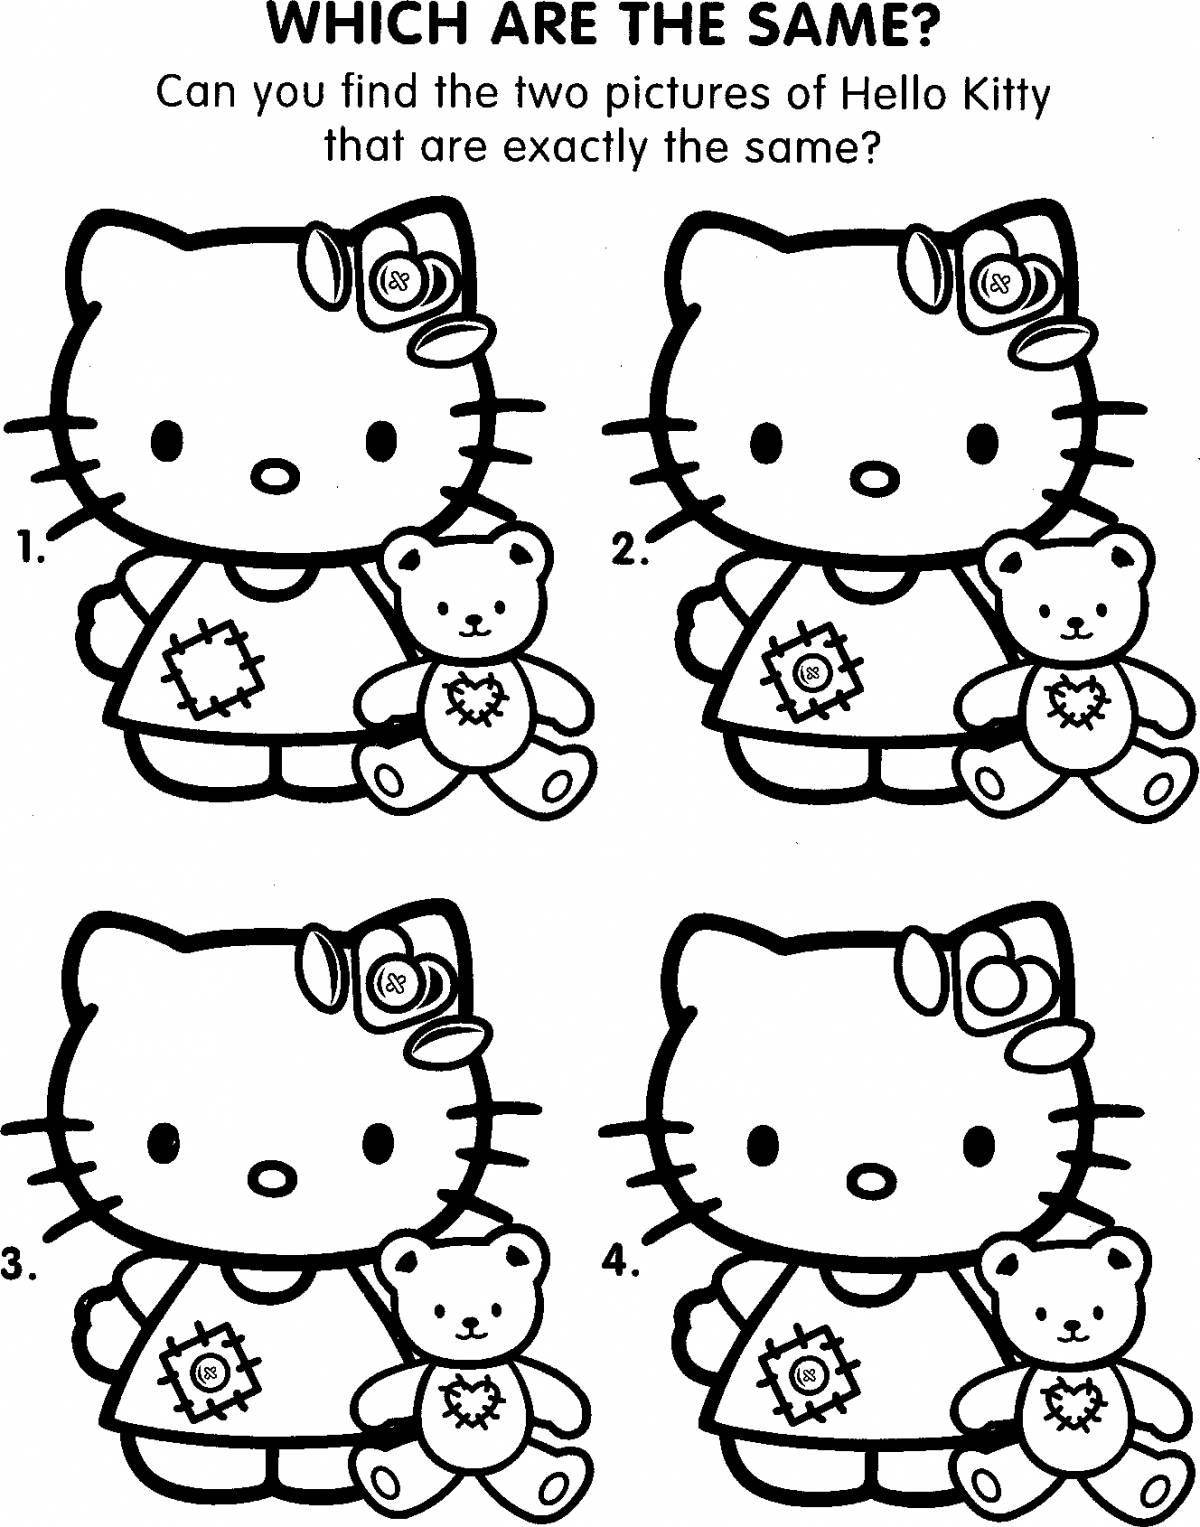 Hello kitty wonderful coloring book